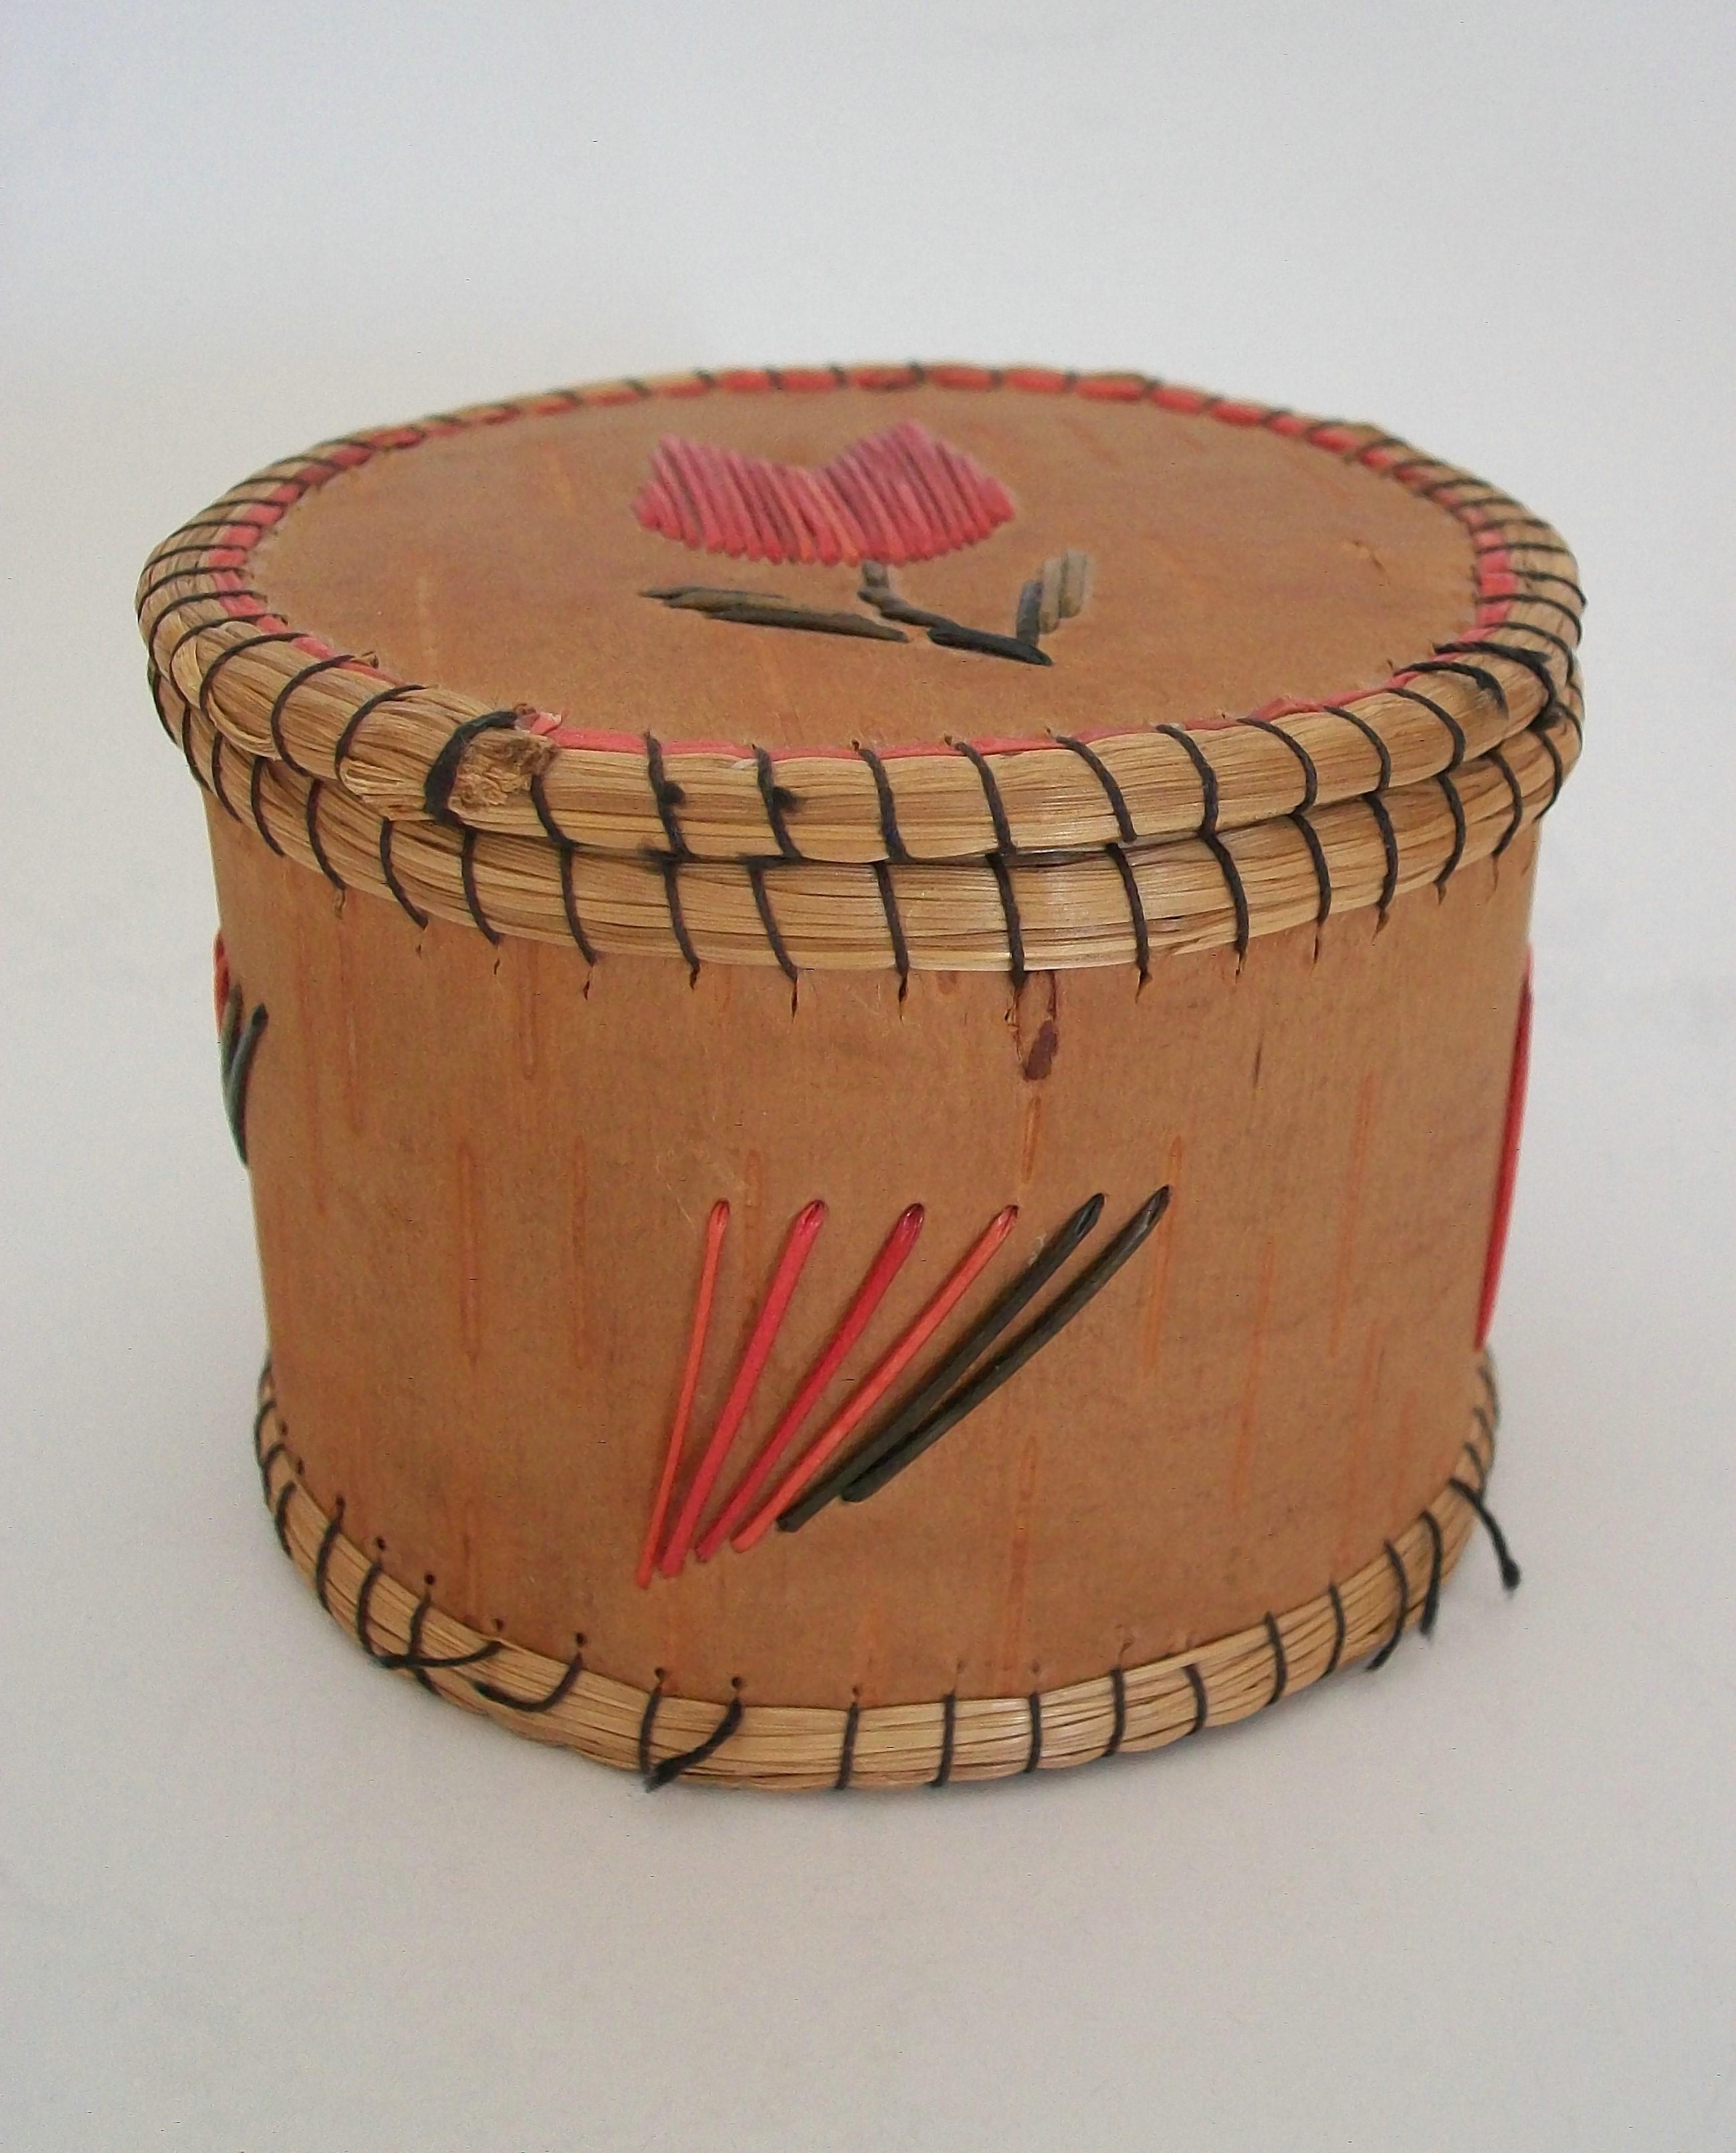 Canadian Chippewa Birch Bark, Quills & Sweetgrass Box with Tulip - Canada - Early 20th C. For Sale